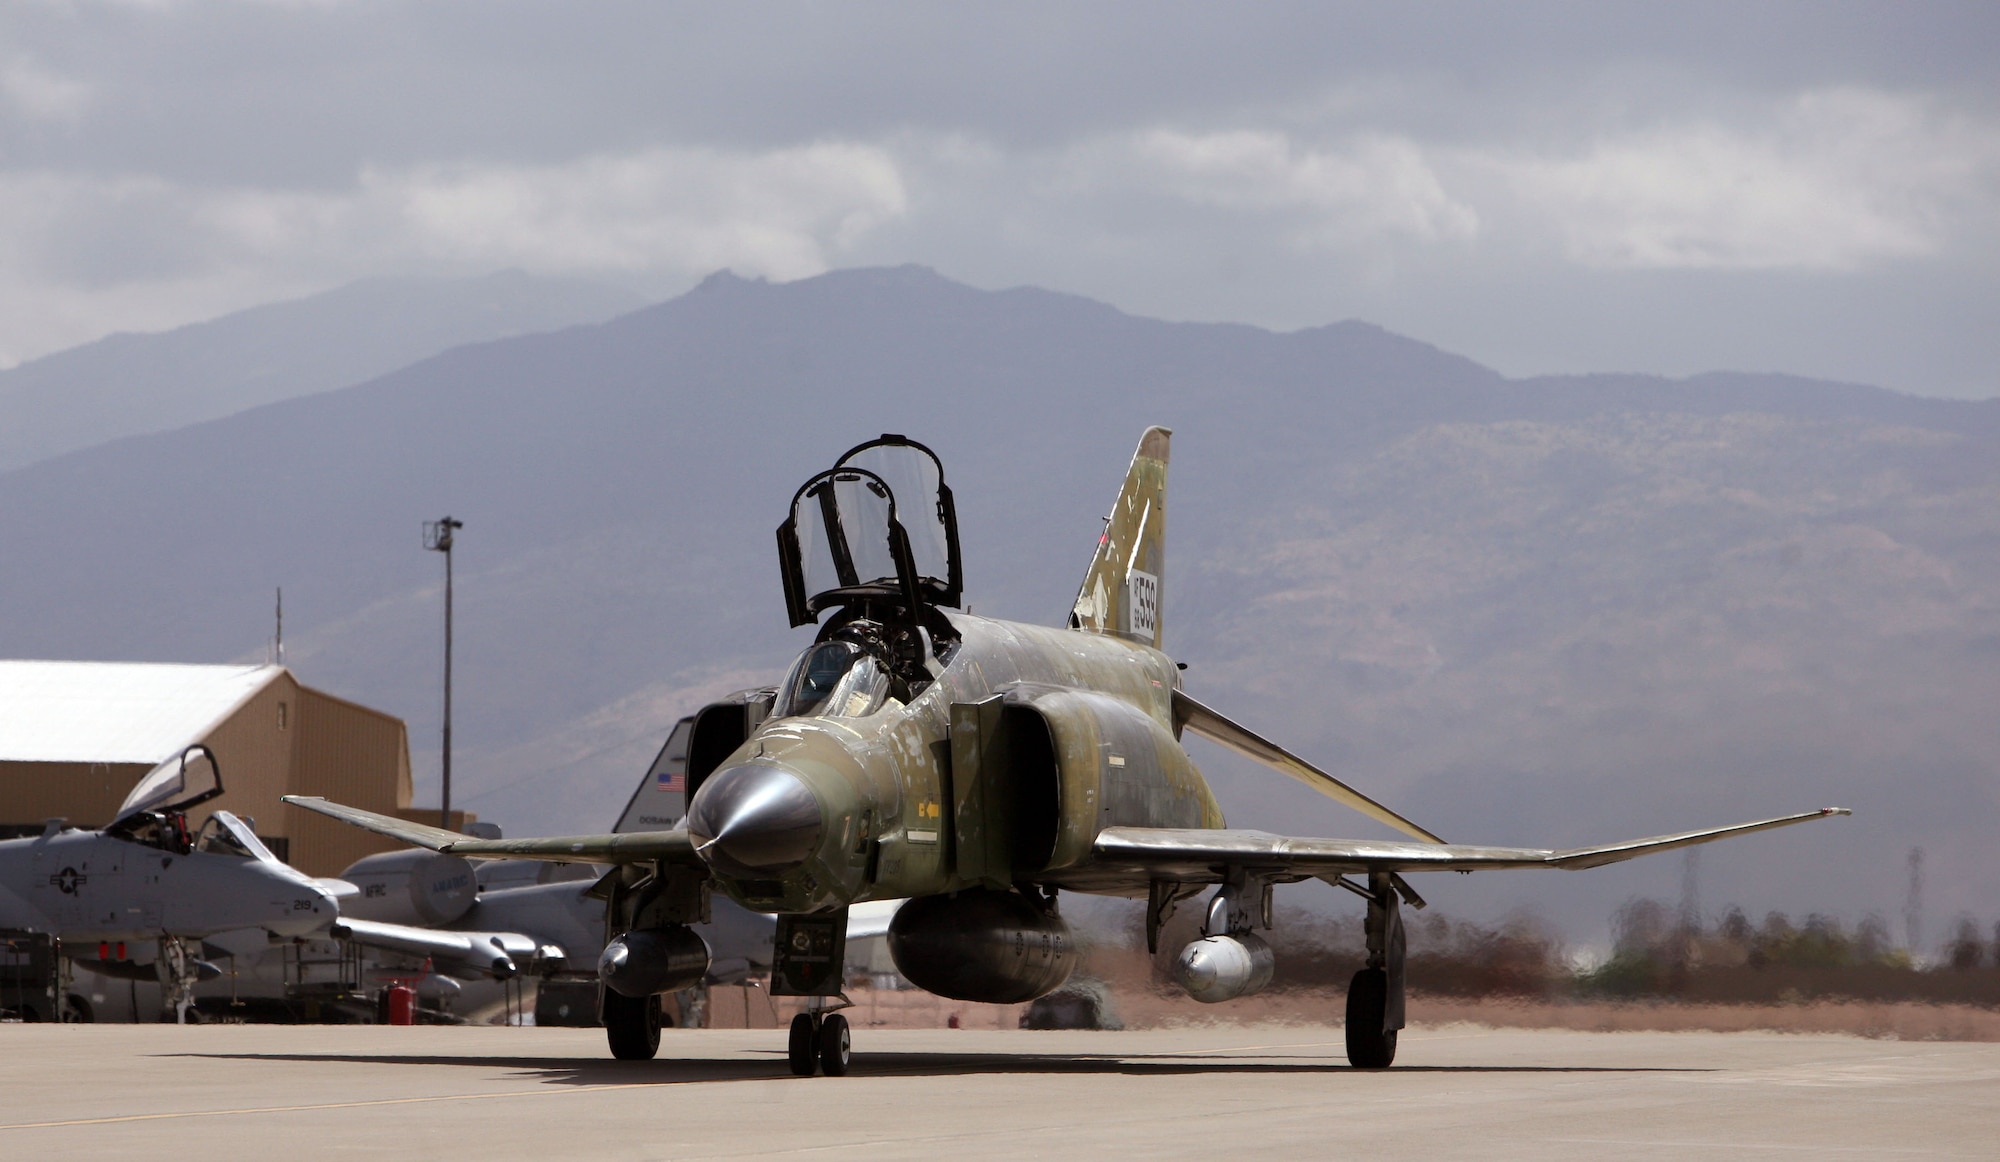 An F-4 Phantom, tail number 68-0599, departs from the 309th Aerospace Maintenance and Regeneration Group at Davis-Monthan Air Force Base, Ariz., April 17, 2013. The aircraft was the last F-4 regenerated by AMARG in support of Air Combat Command’s full-scale aerial target program. (Courtesy photo/Released)